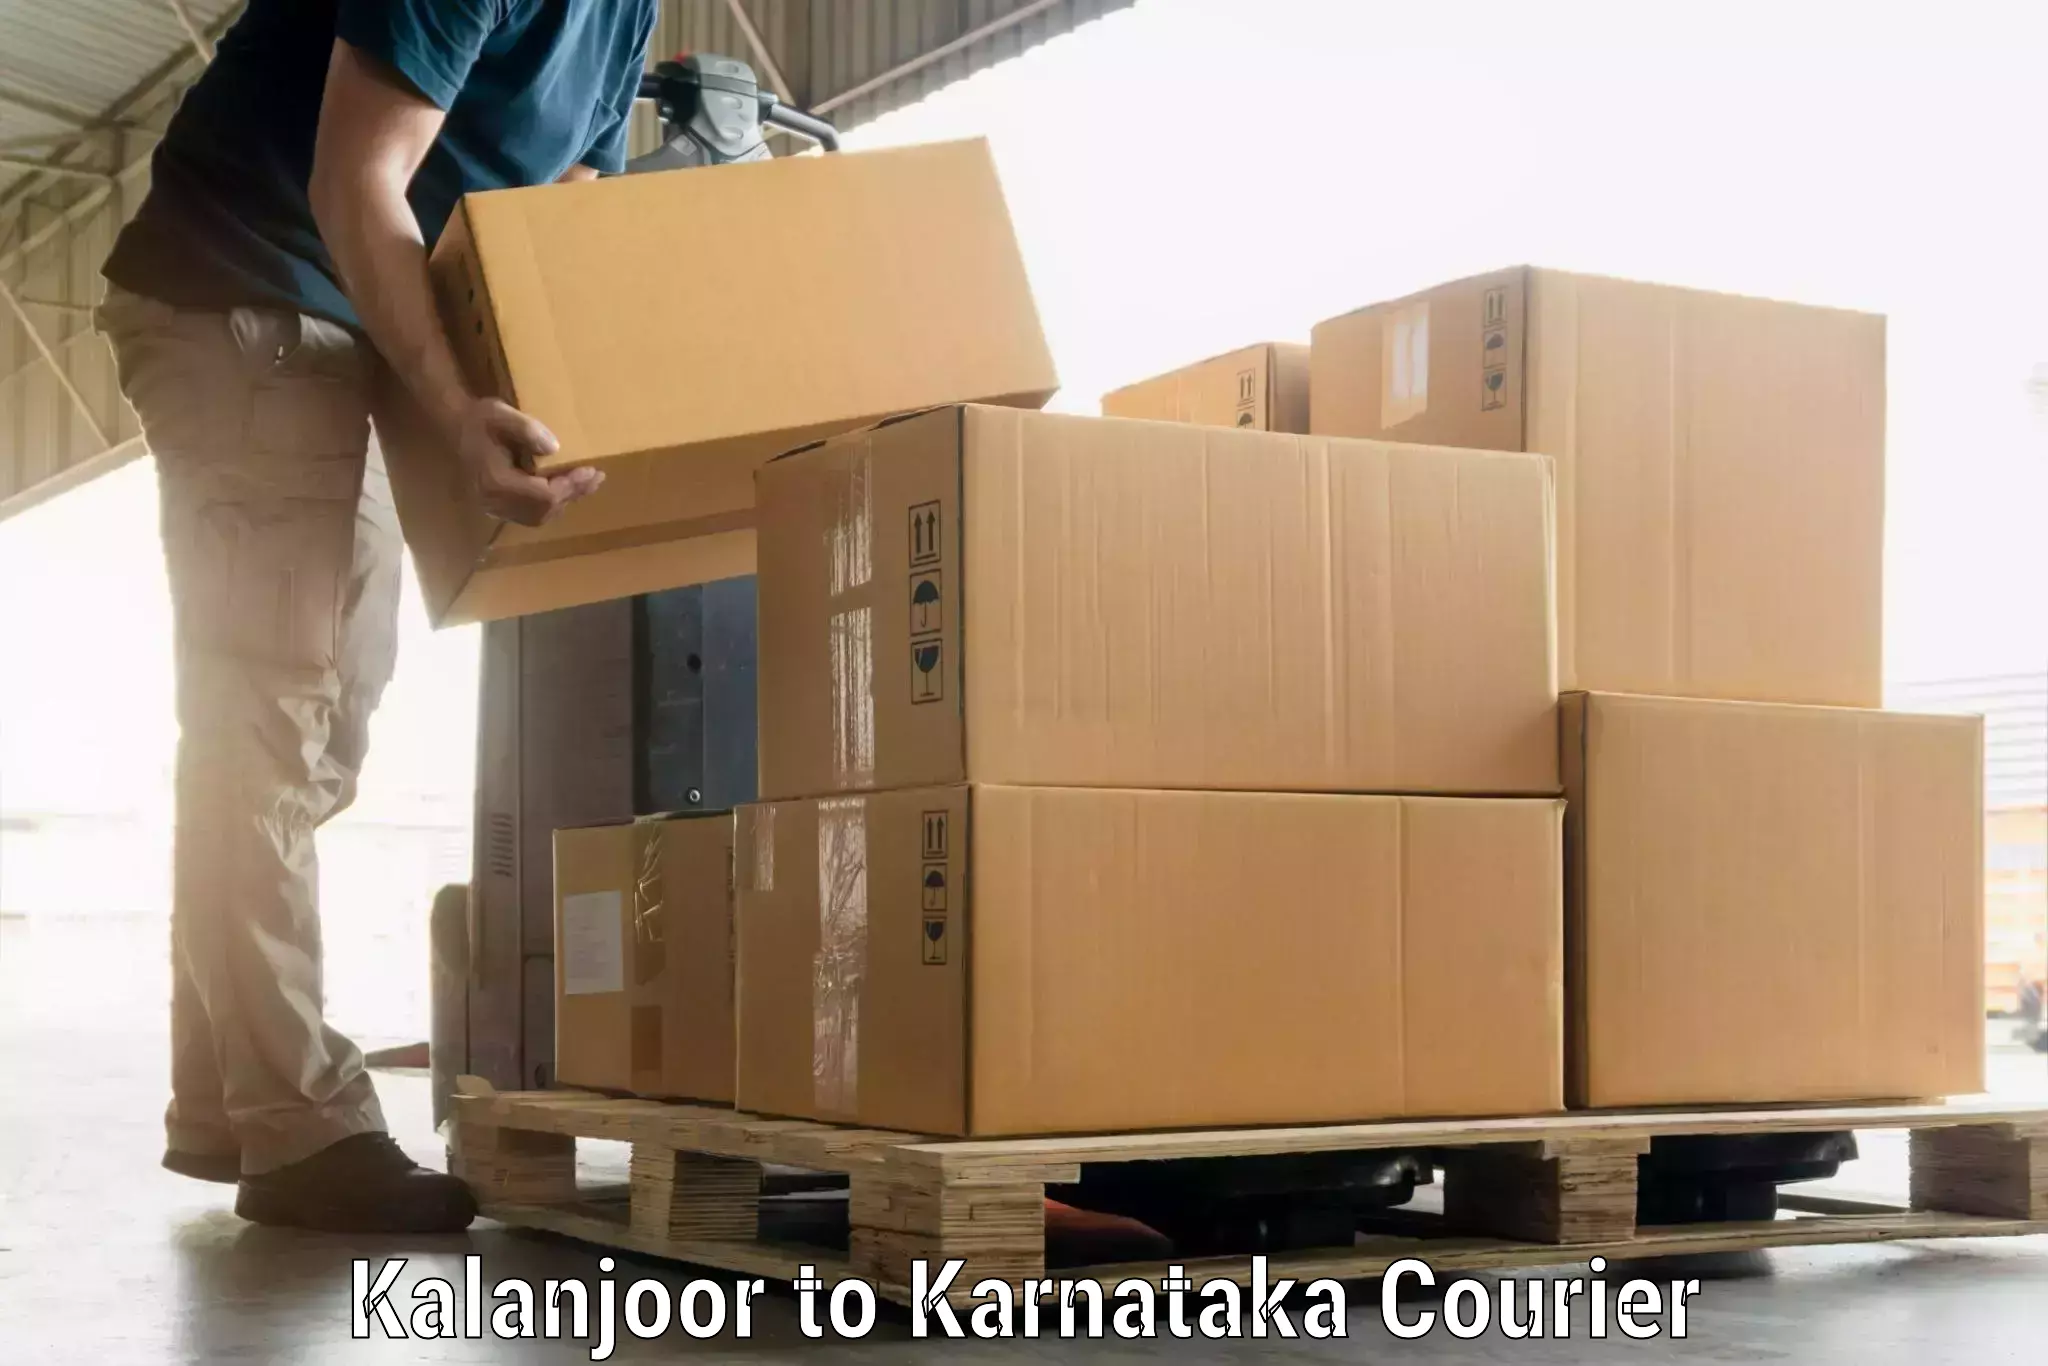 Baggage transport technology Kalanjoor to Manipal Academy of Higher Education